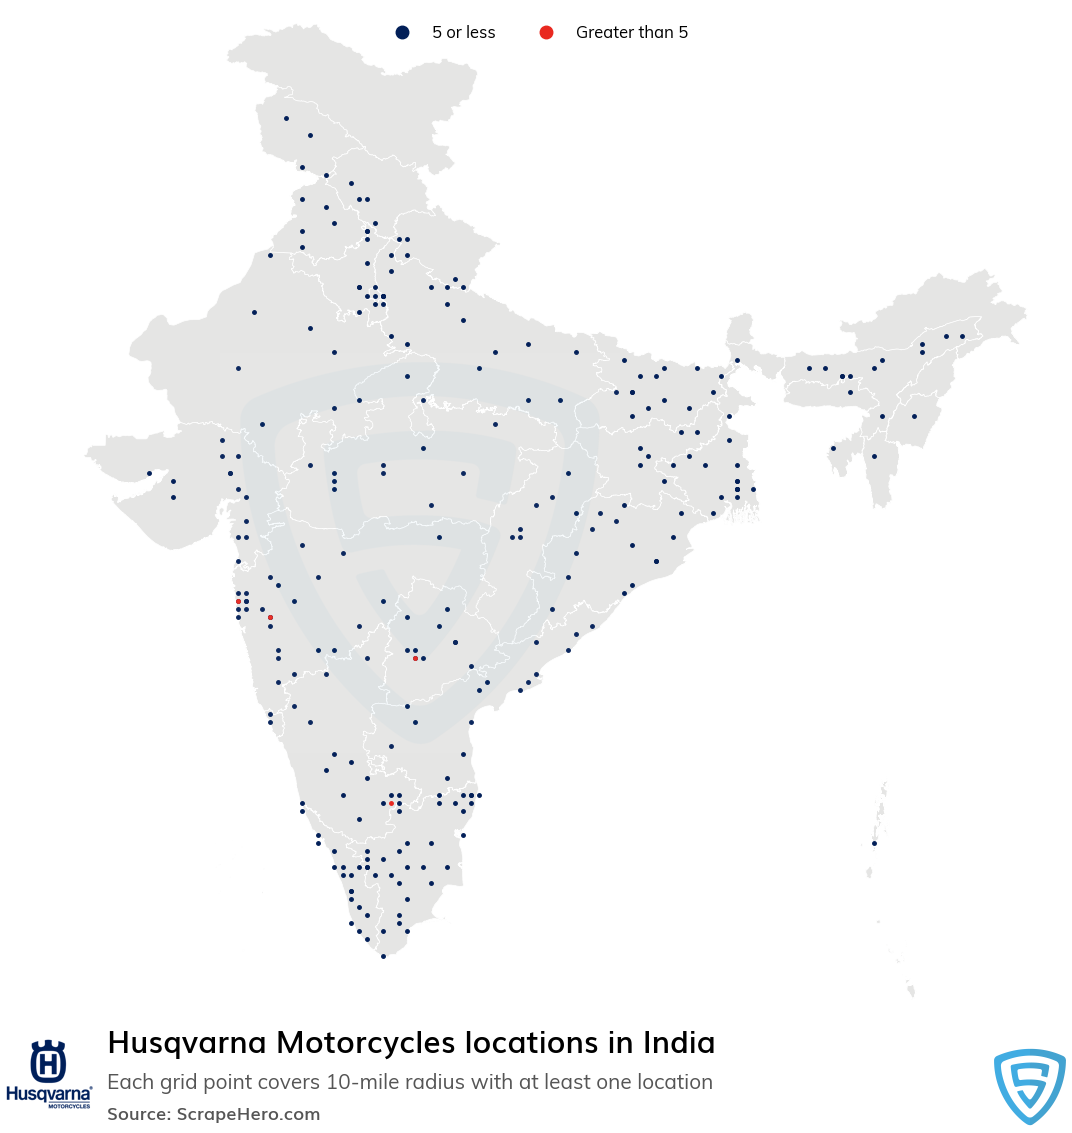 Map of Husqvarna Motorcycles locations in India in 2021